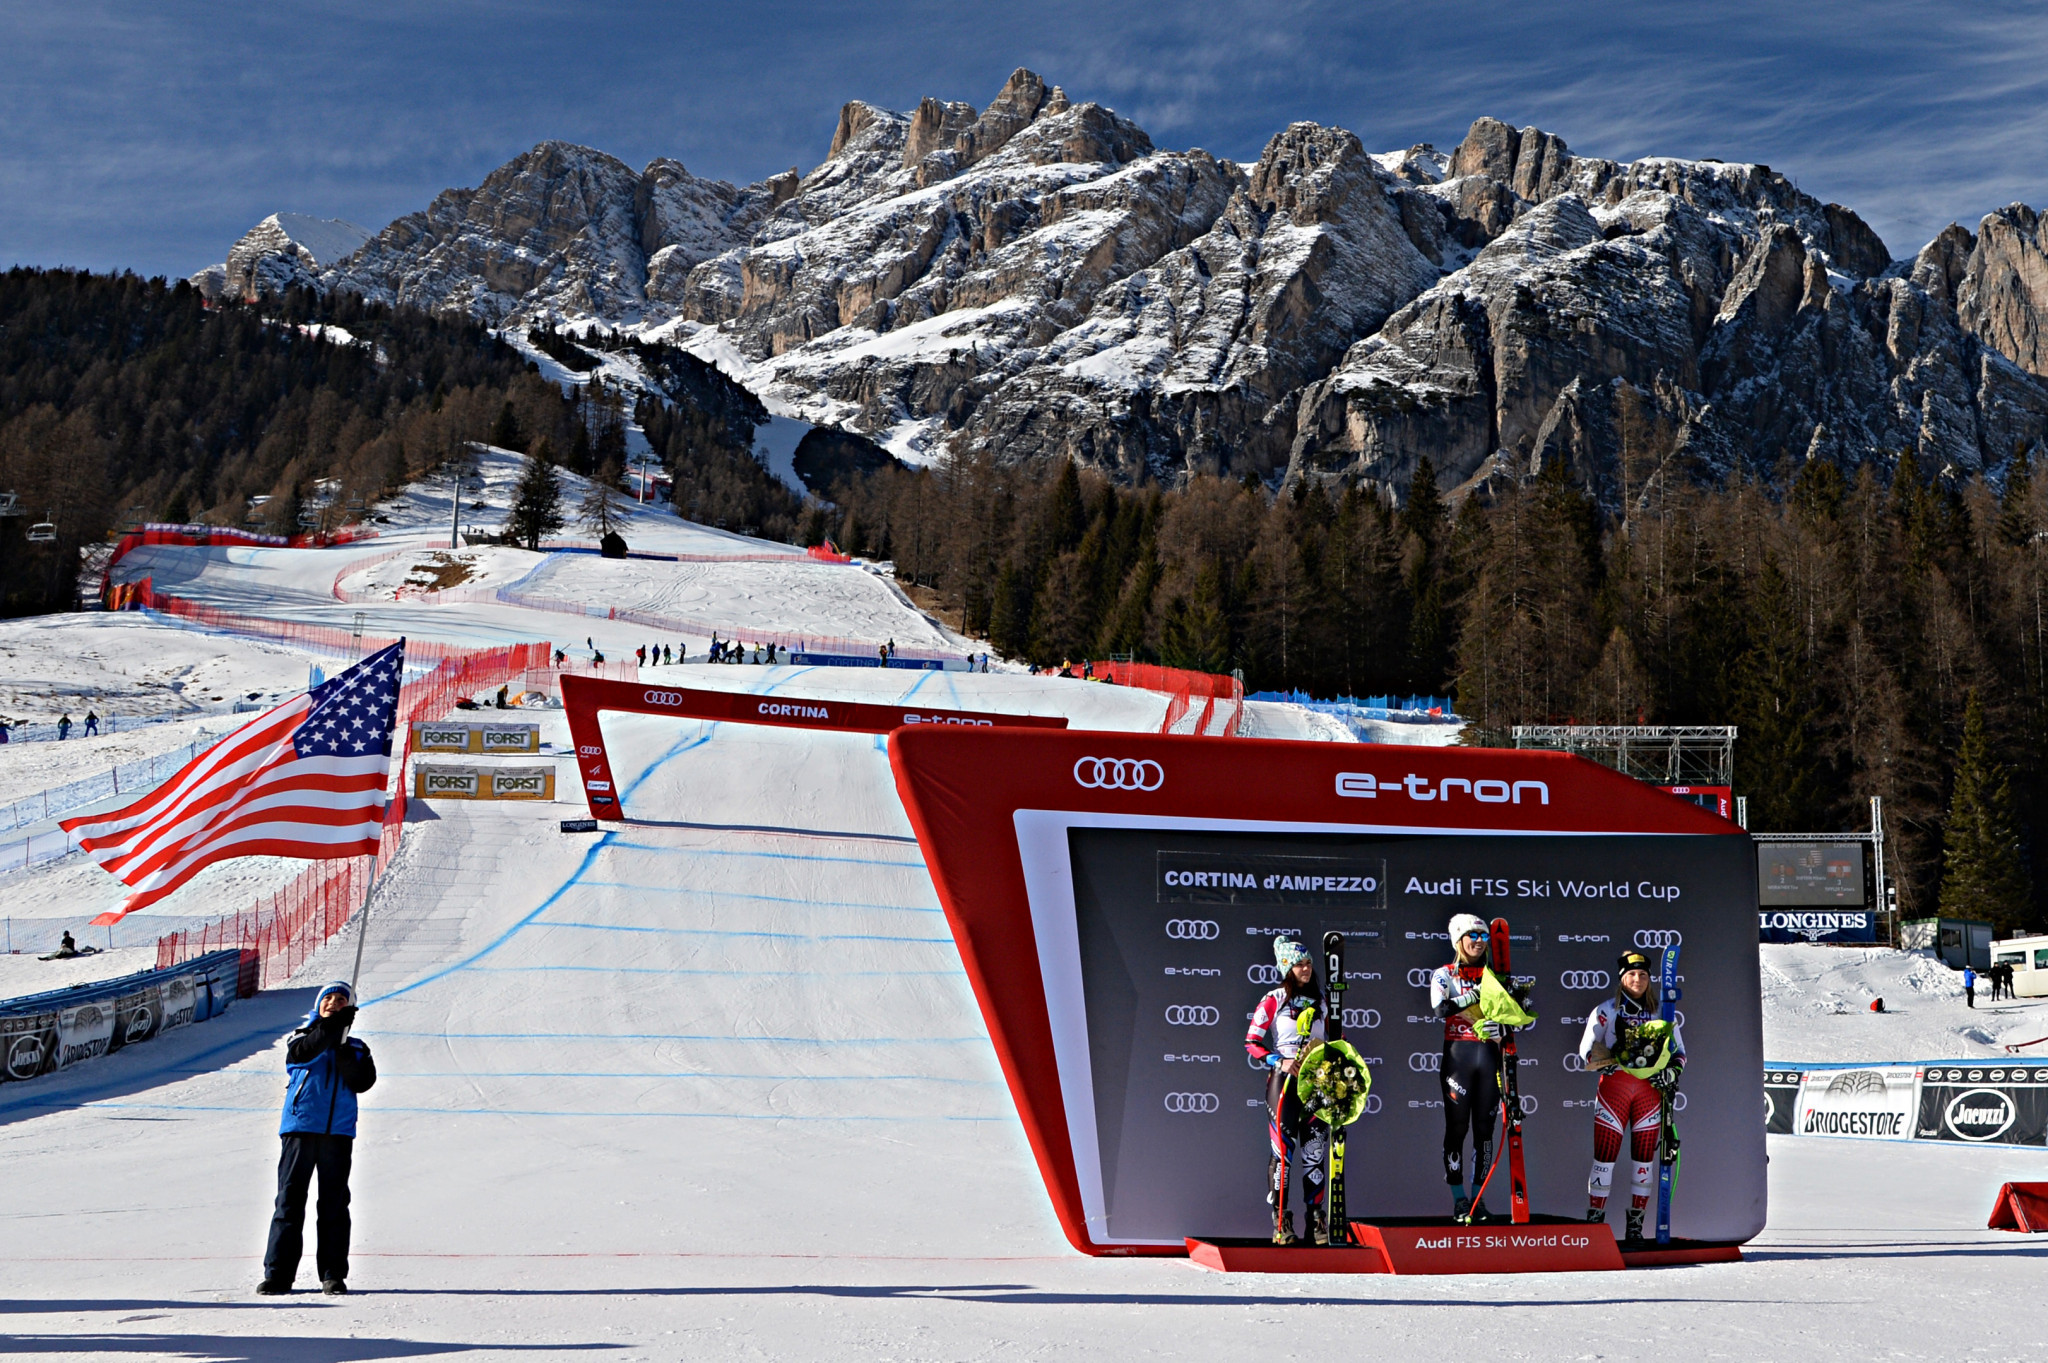 FIS to decide on status of Alpine World Cup Finals on Friday amid coronavirus outbreak